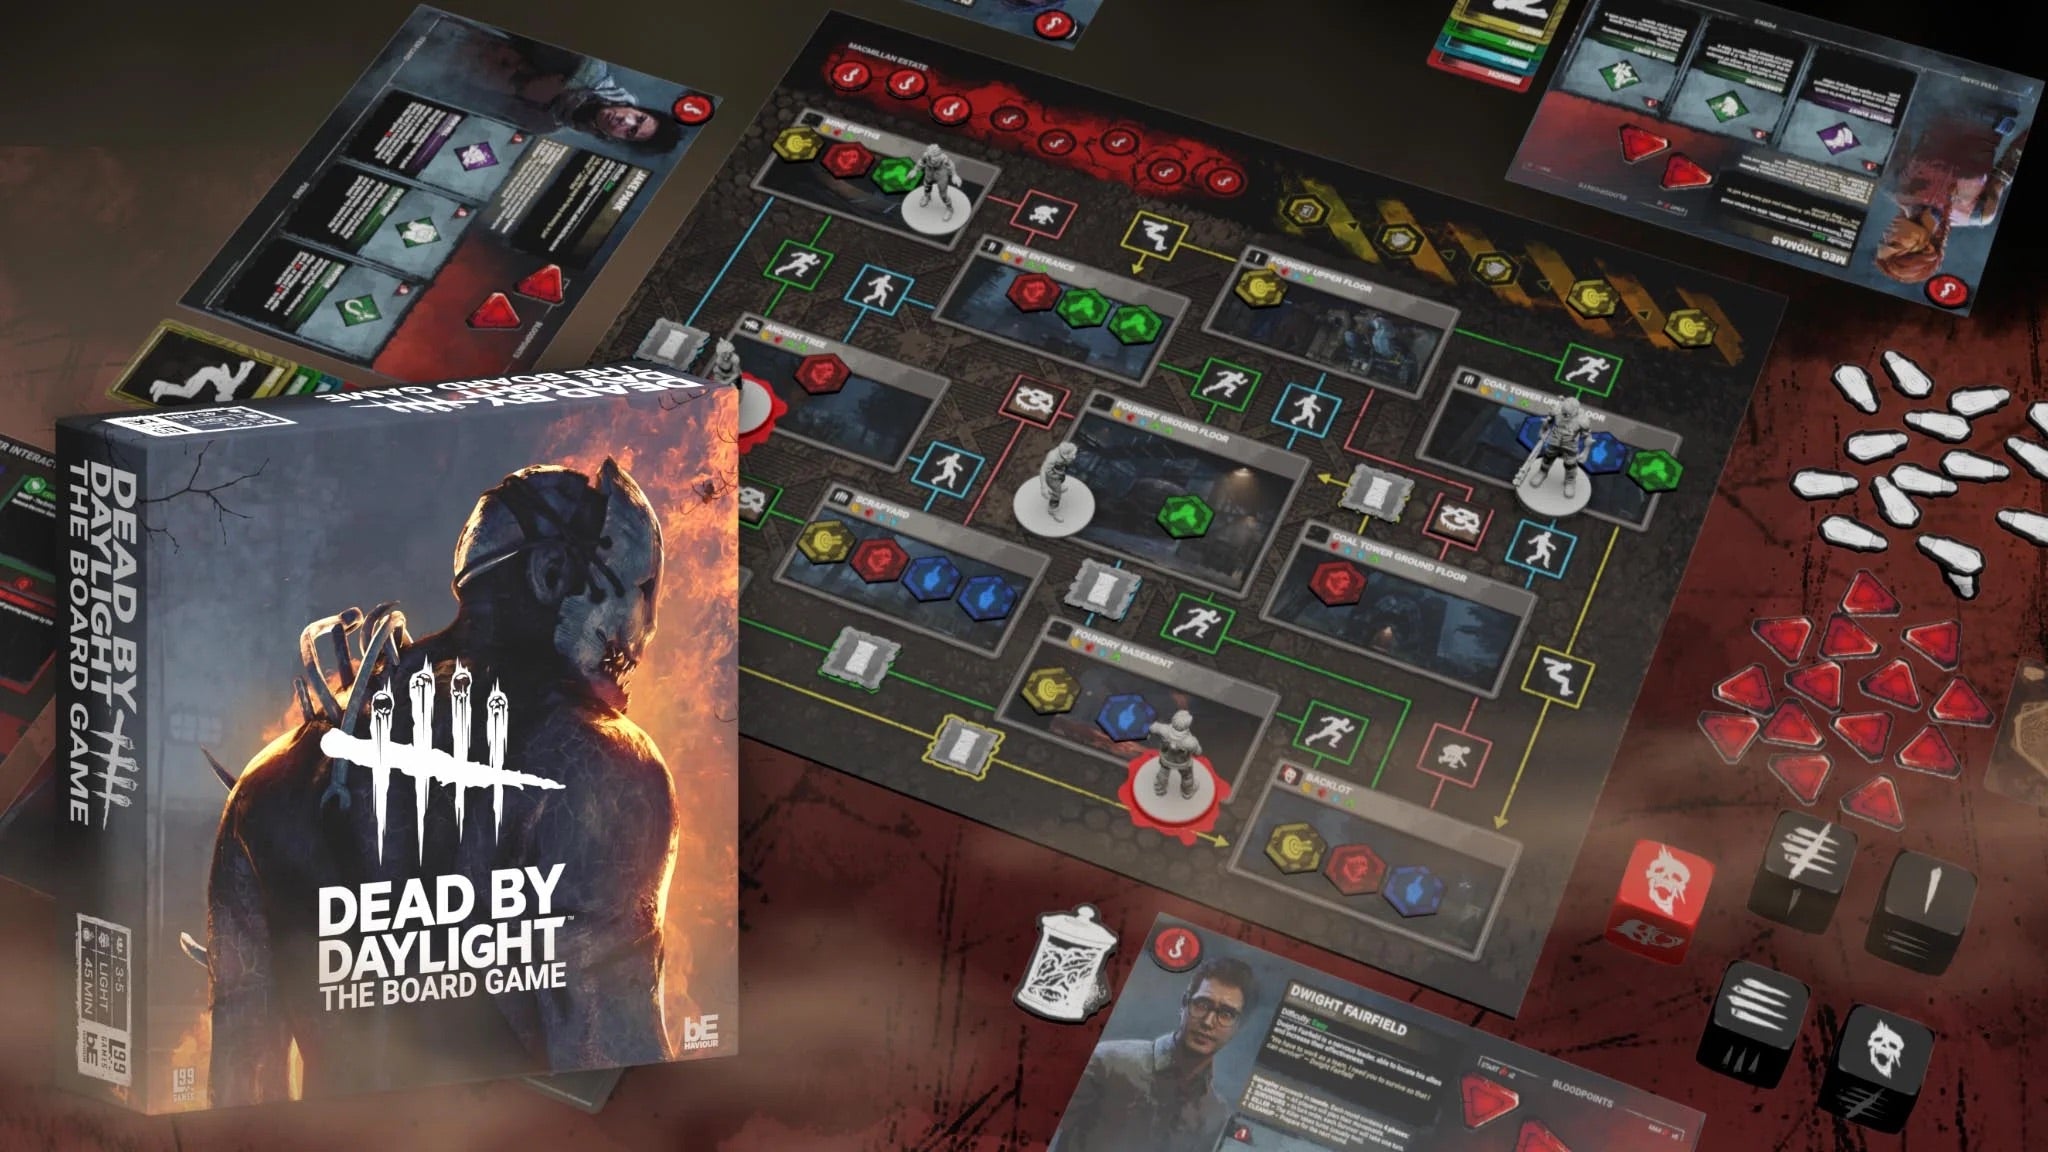 Dead by Daylight™: The Board Game (Standard Edition)